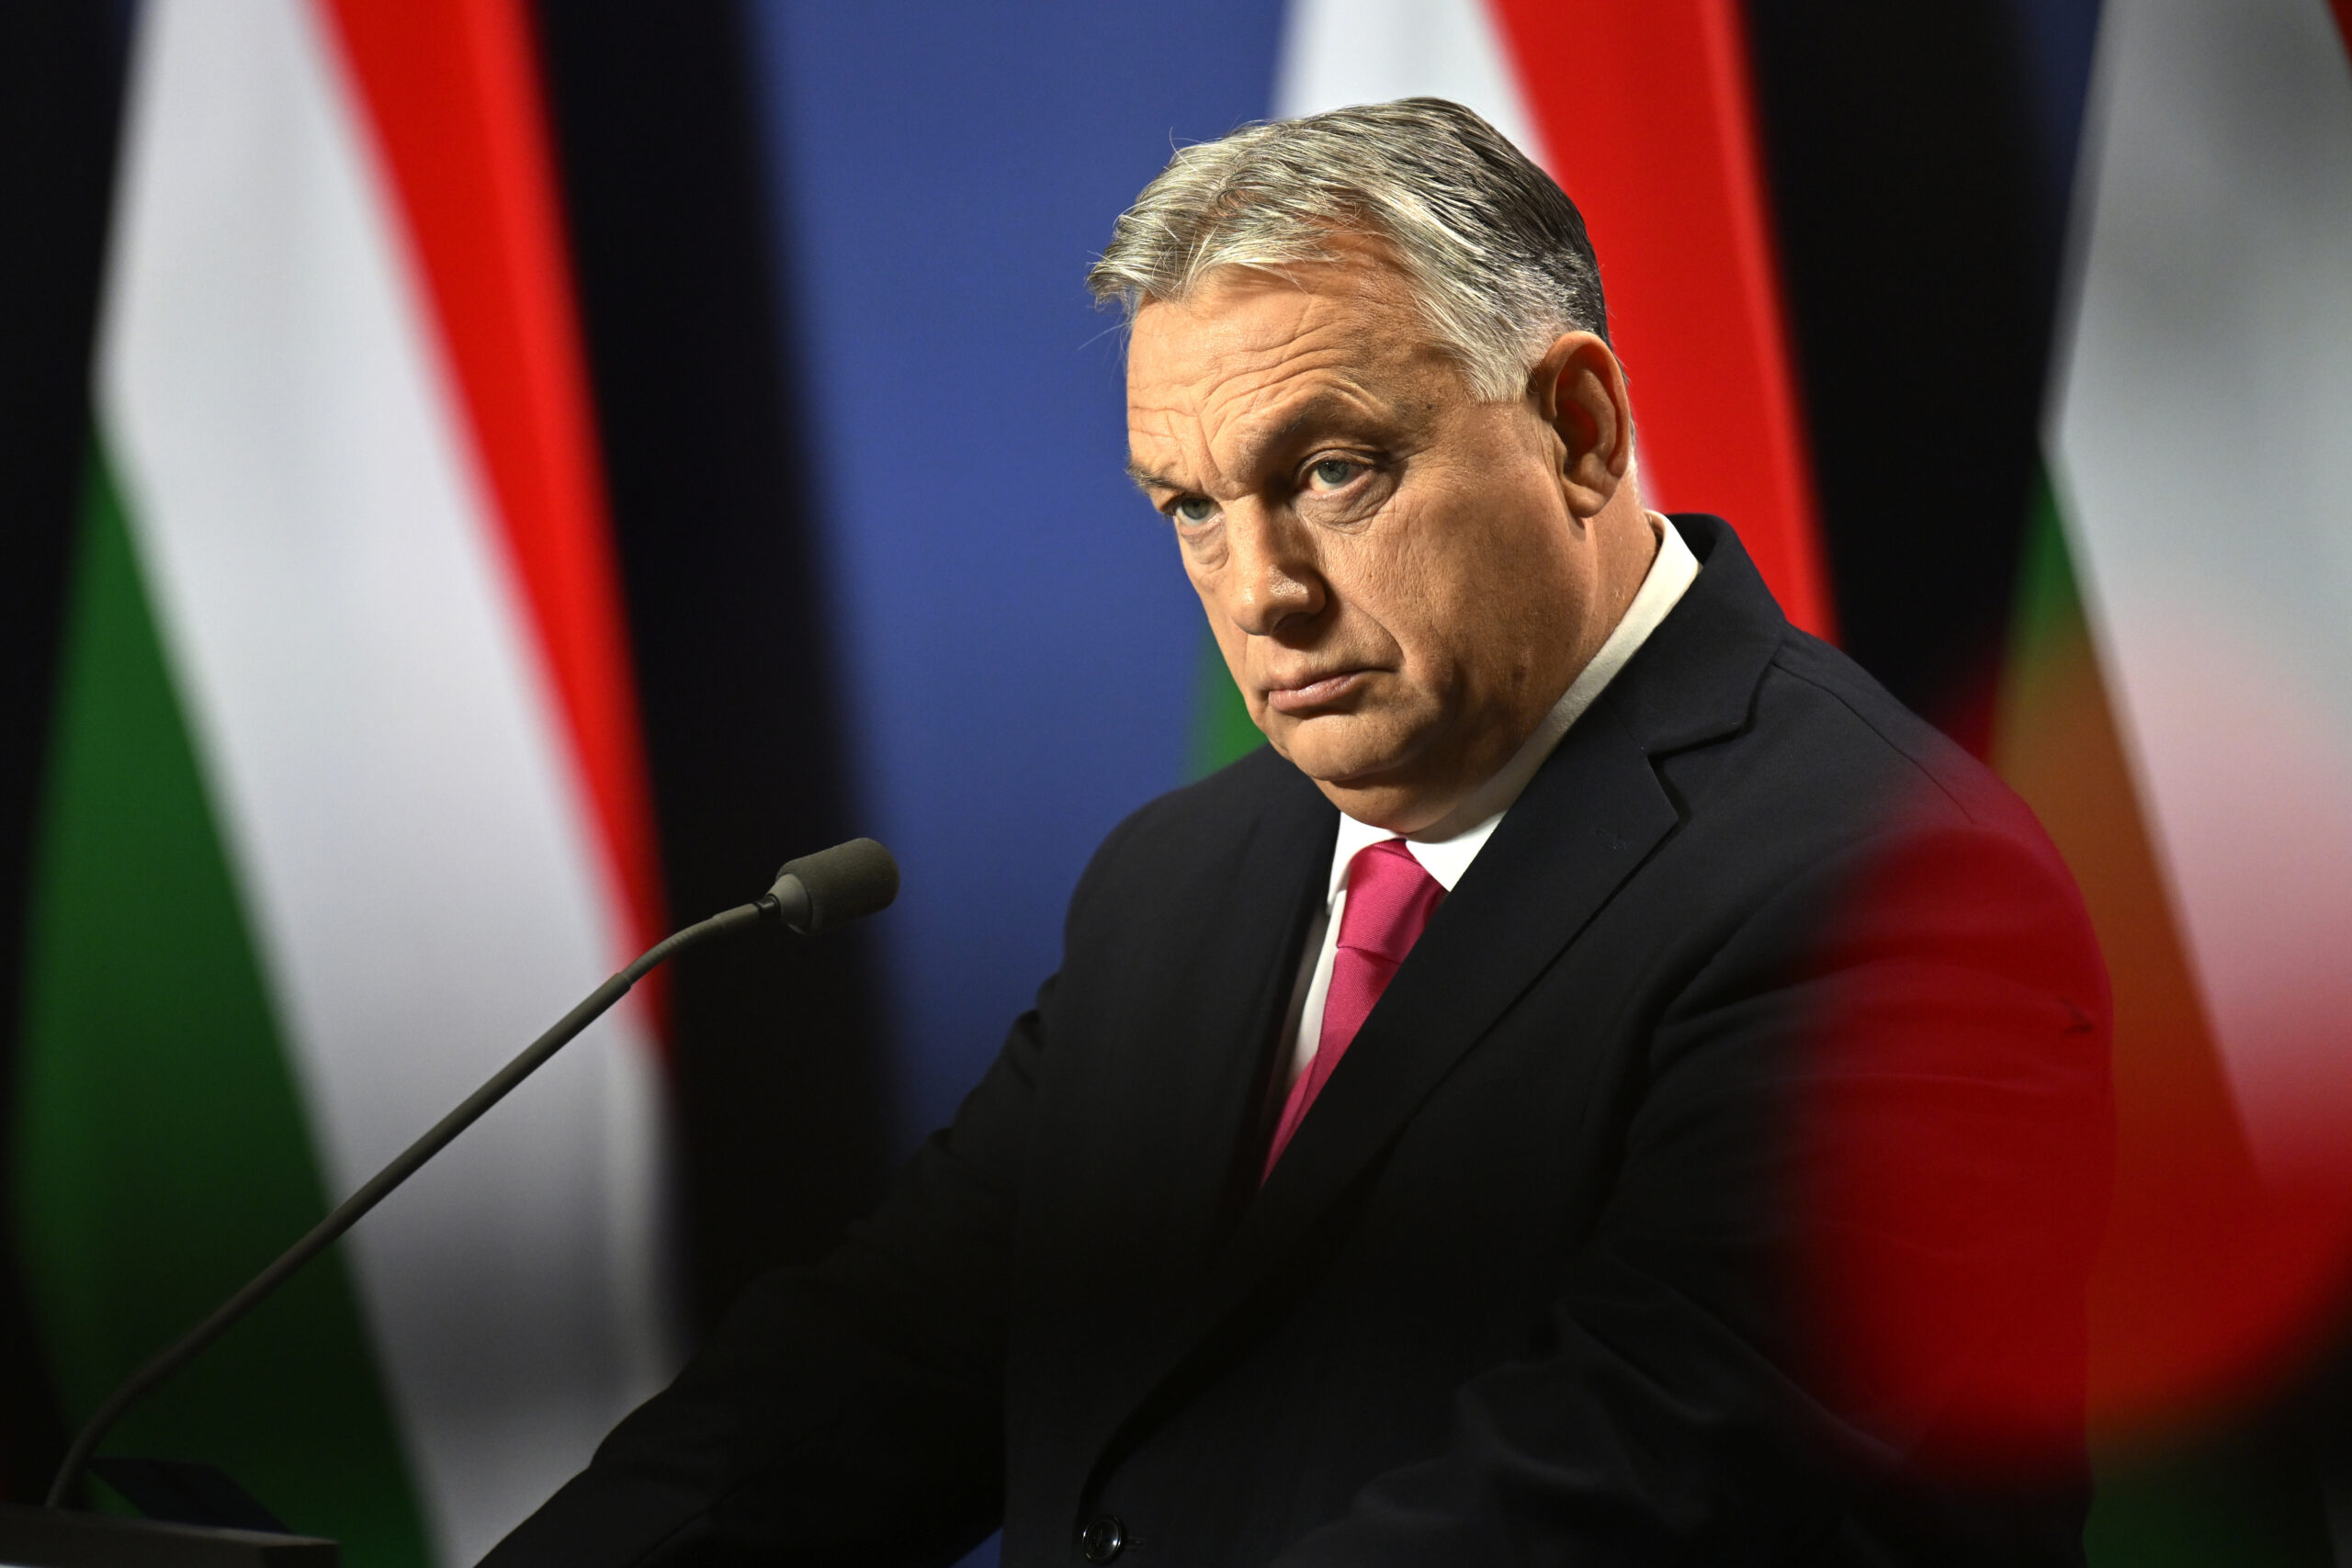 Hungarian Prime Minister Viktor Orban arrives for an annual international press conference in Budapest, Hungary, Dec. 21, 2023. Swedish Prime Minister Ulf Kristersson tells his Hungarian counterpart Viktor Orbán that more dialogue would be beneficial after Orbán invited the Swede to Budapest to discuss Sweden's NATO accession. (AP Photo/Denes Erdos, File)